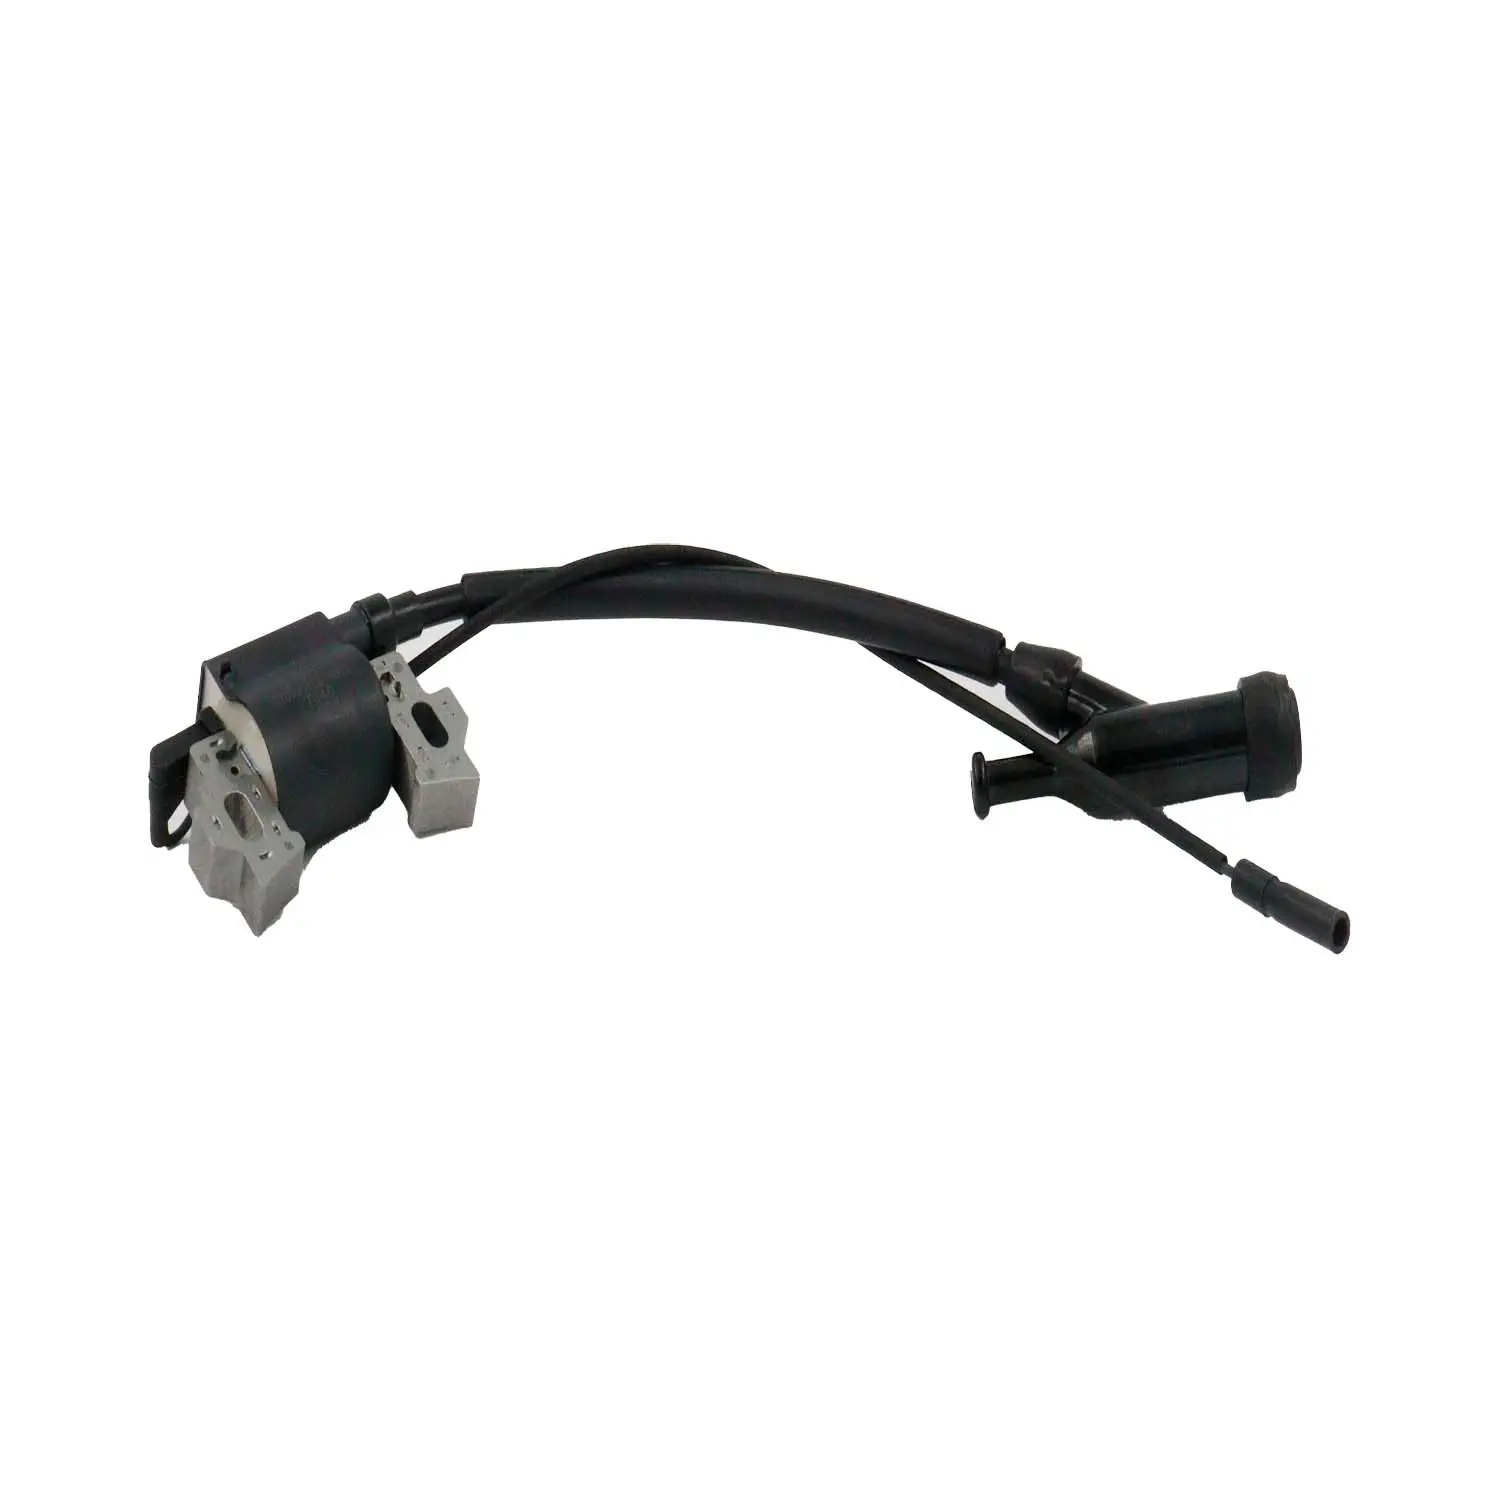 YP  Yuxin Ignition Coil for Honda 30500-ze1-073 30500-ze1-033